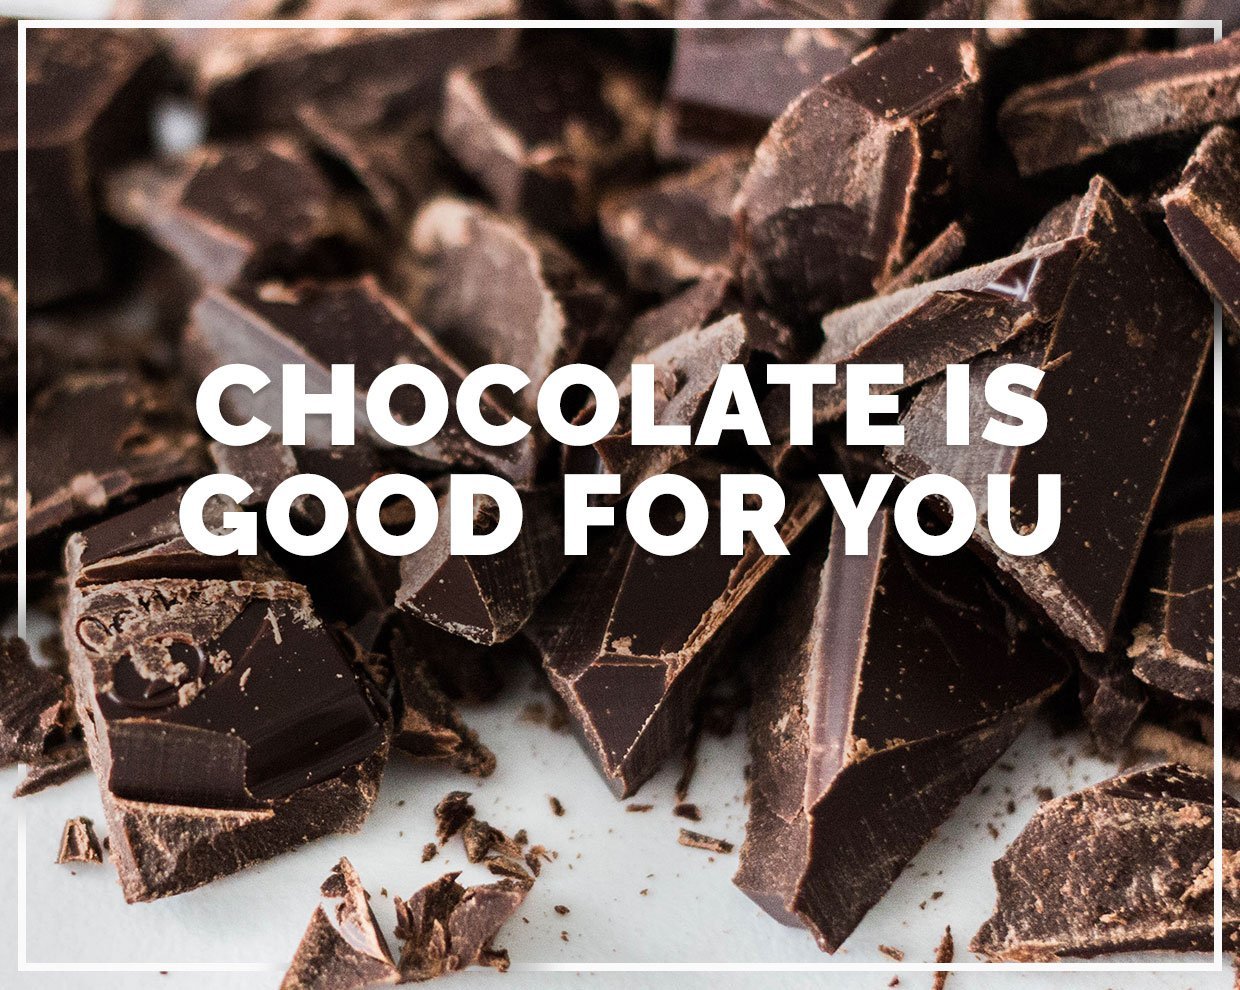 Chocolate is good for you